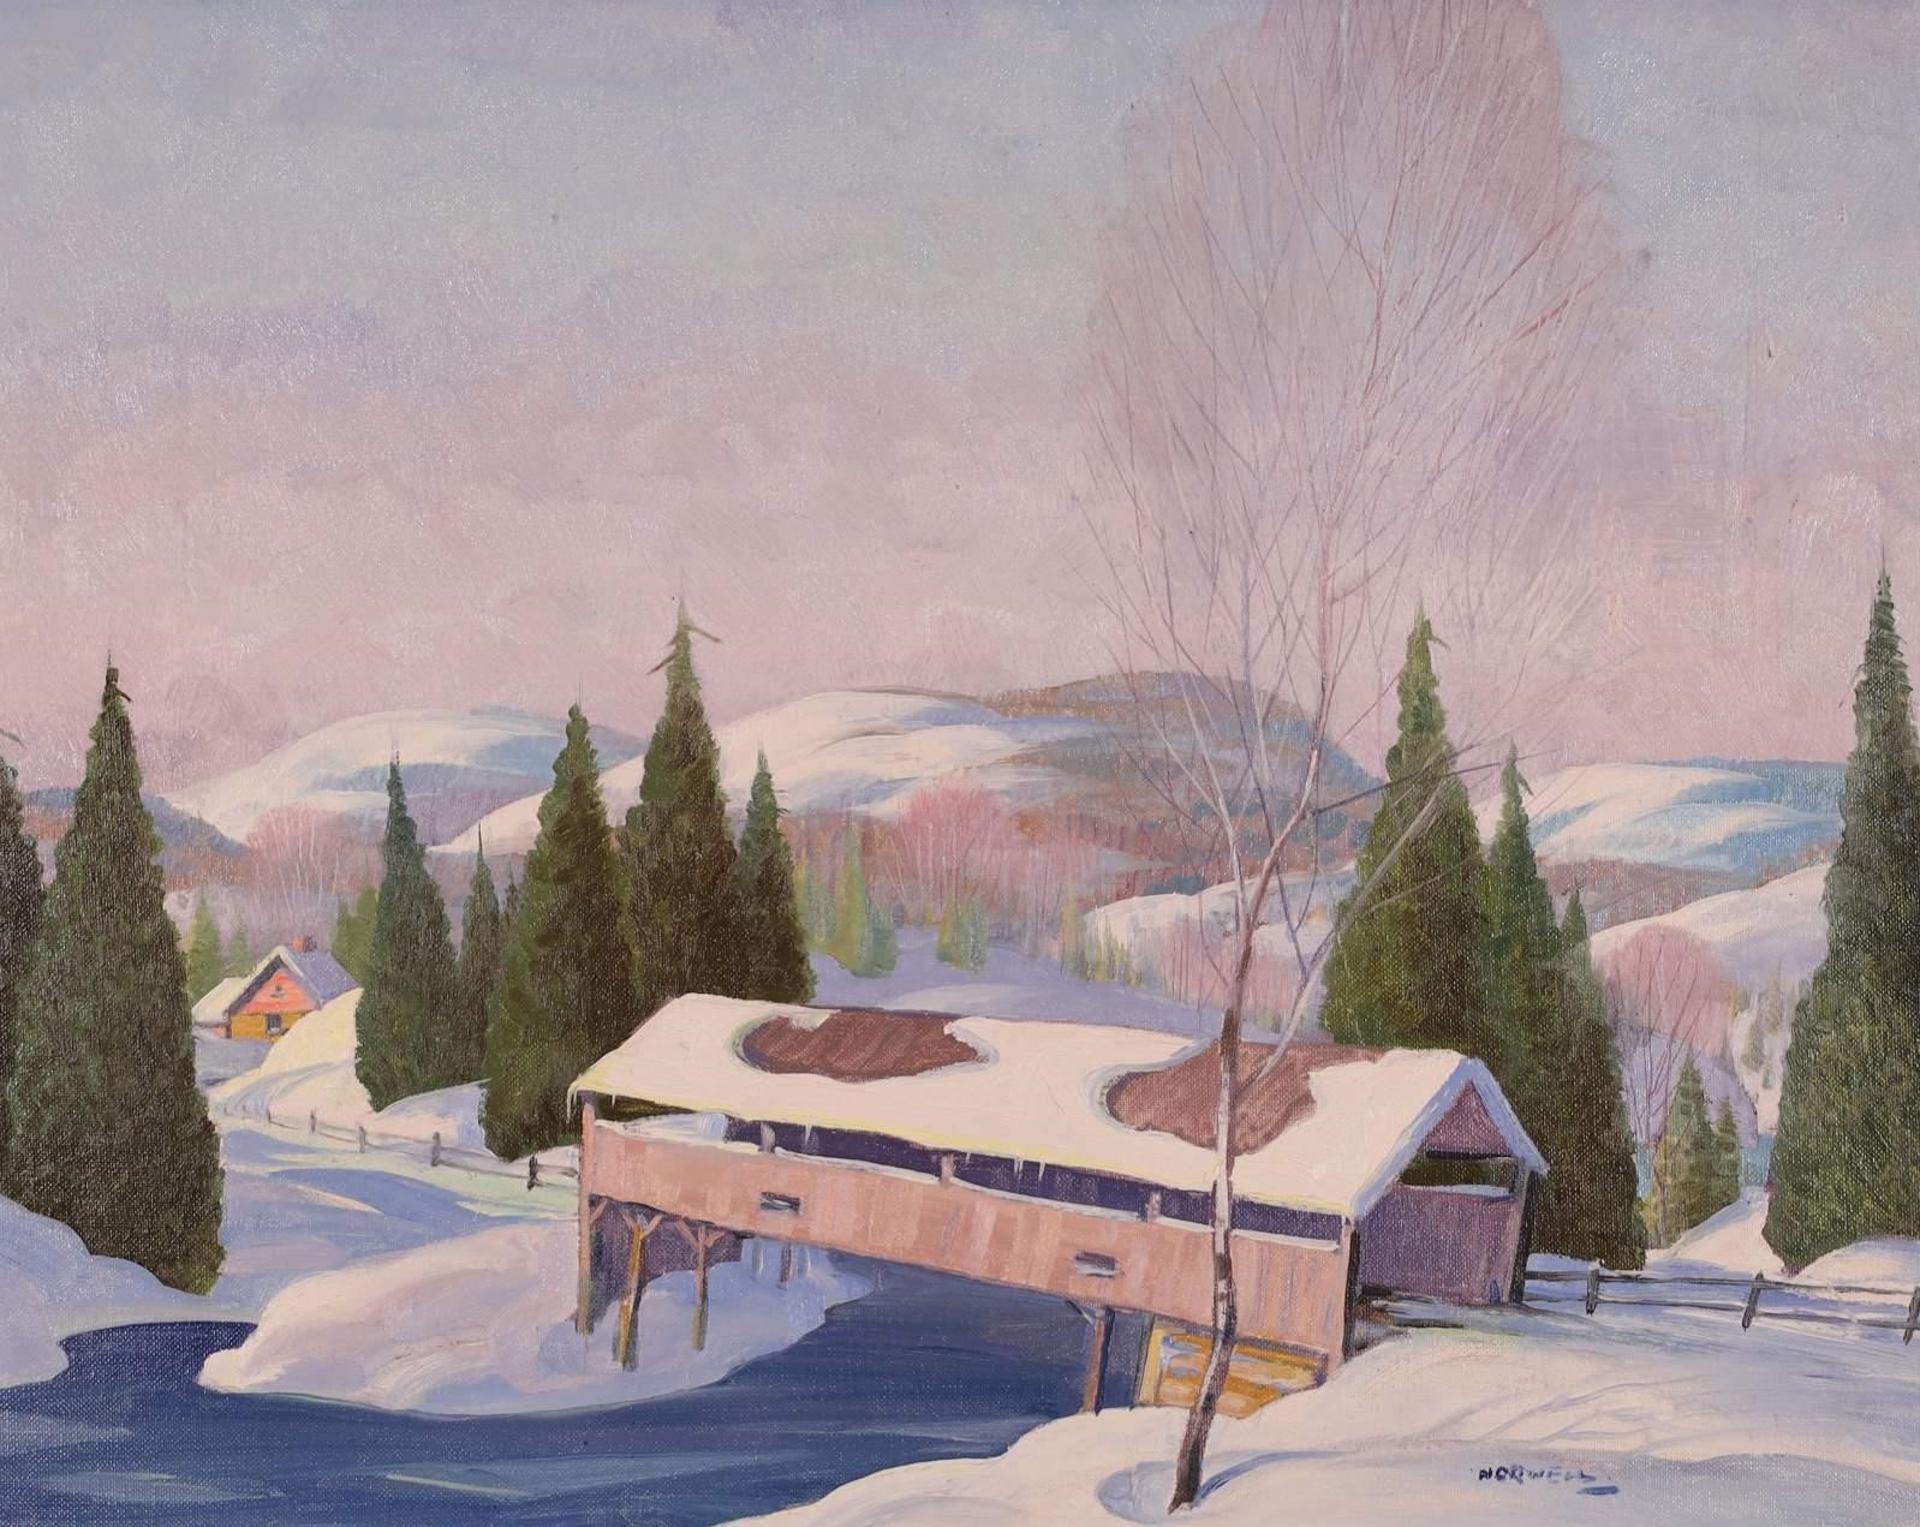 Graham Norble Norwell (1901-1967) - Winter Scene With Covered Bridge